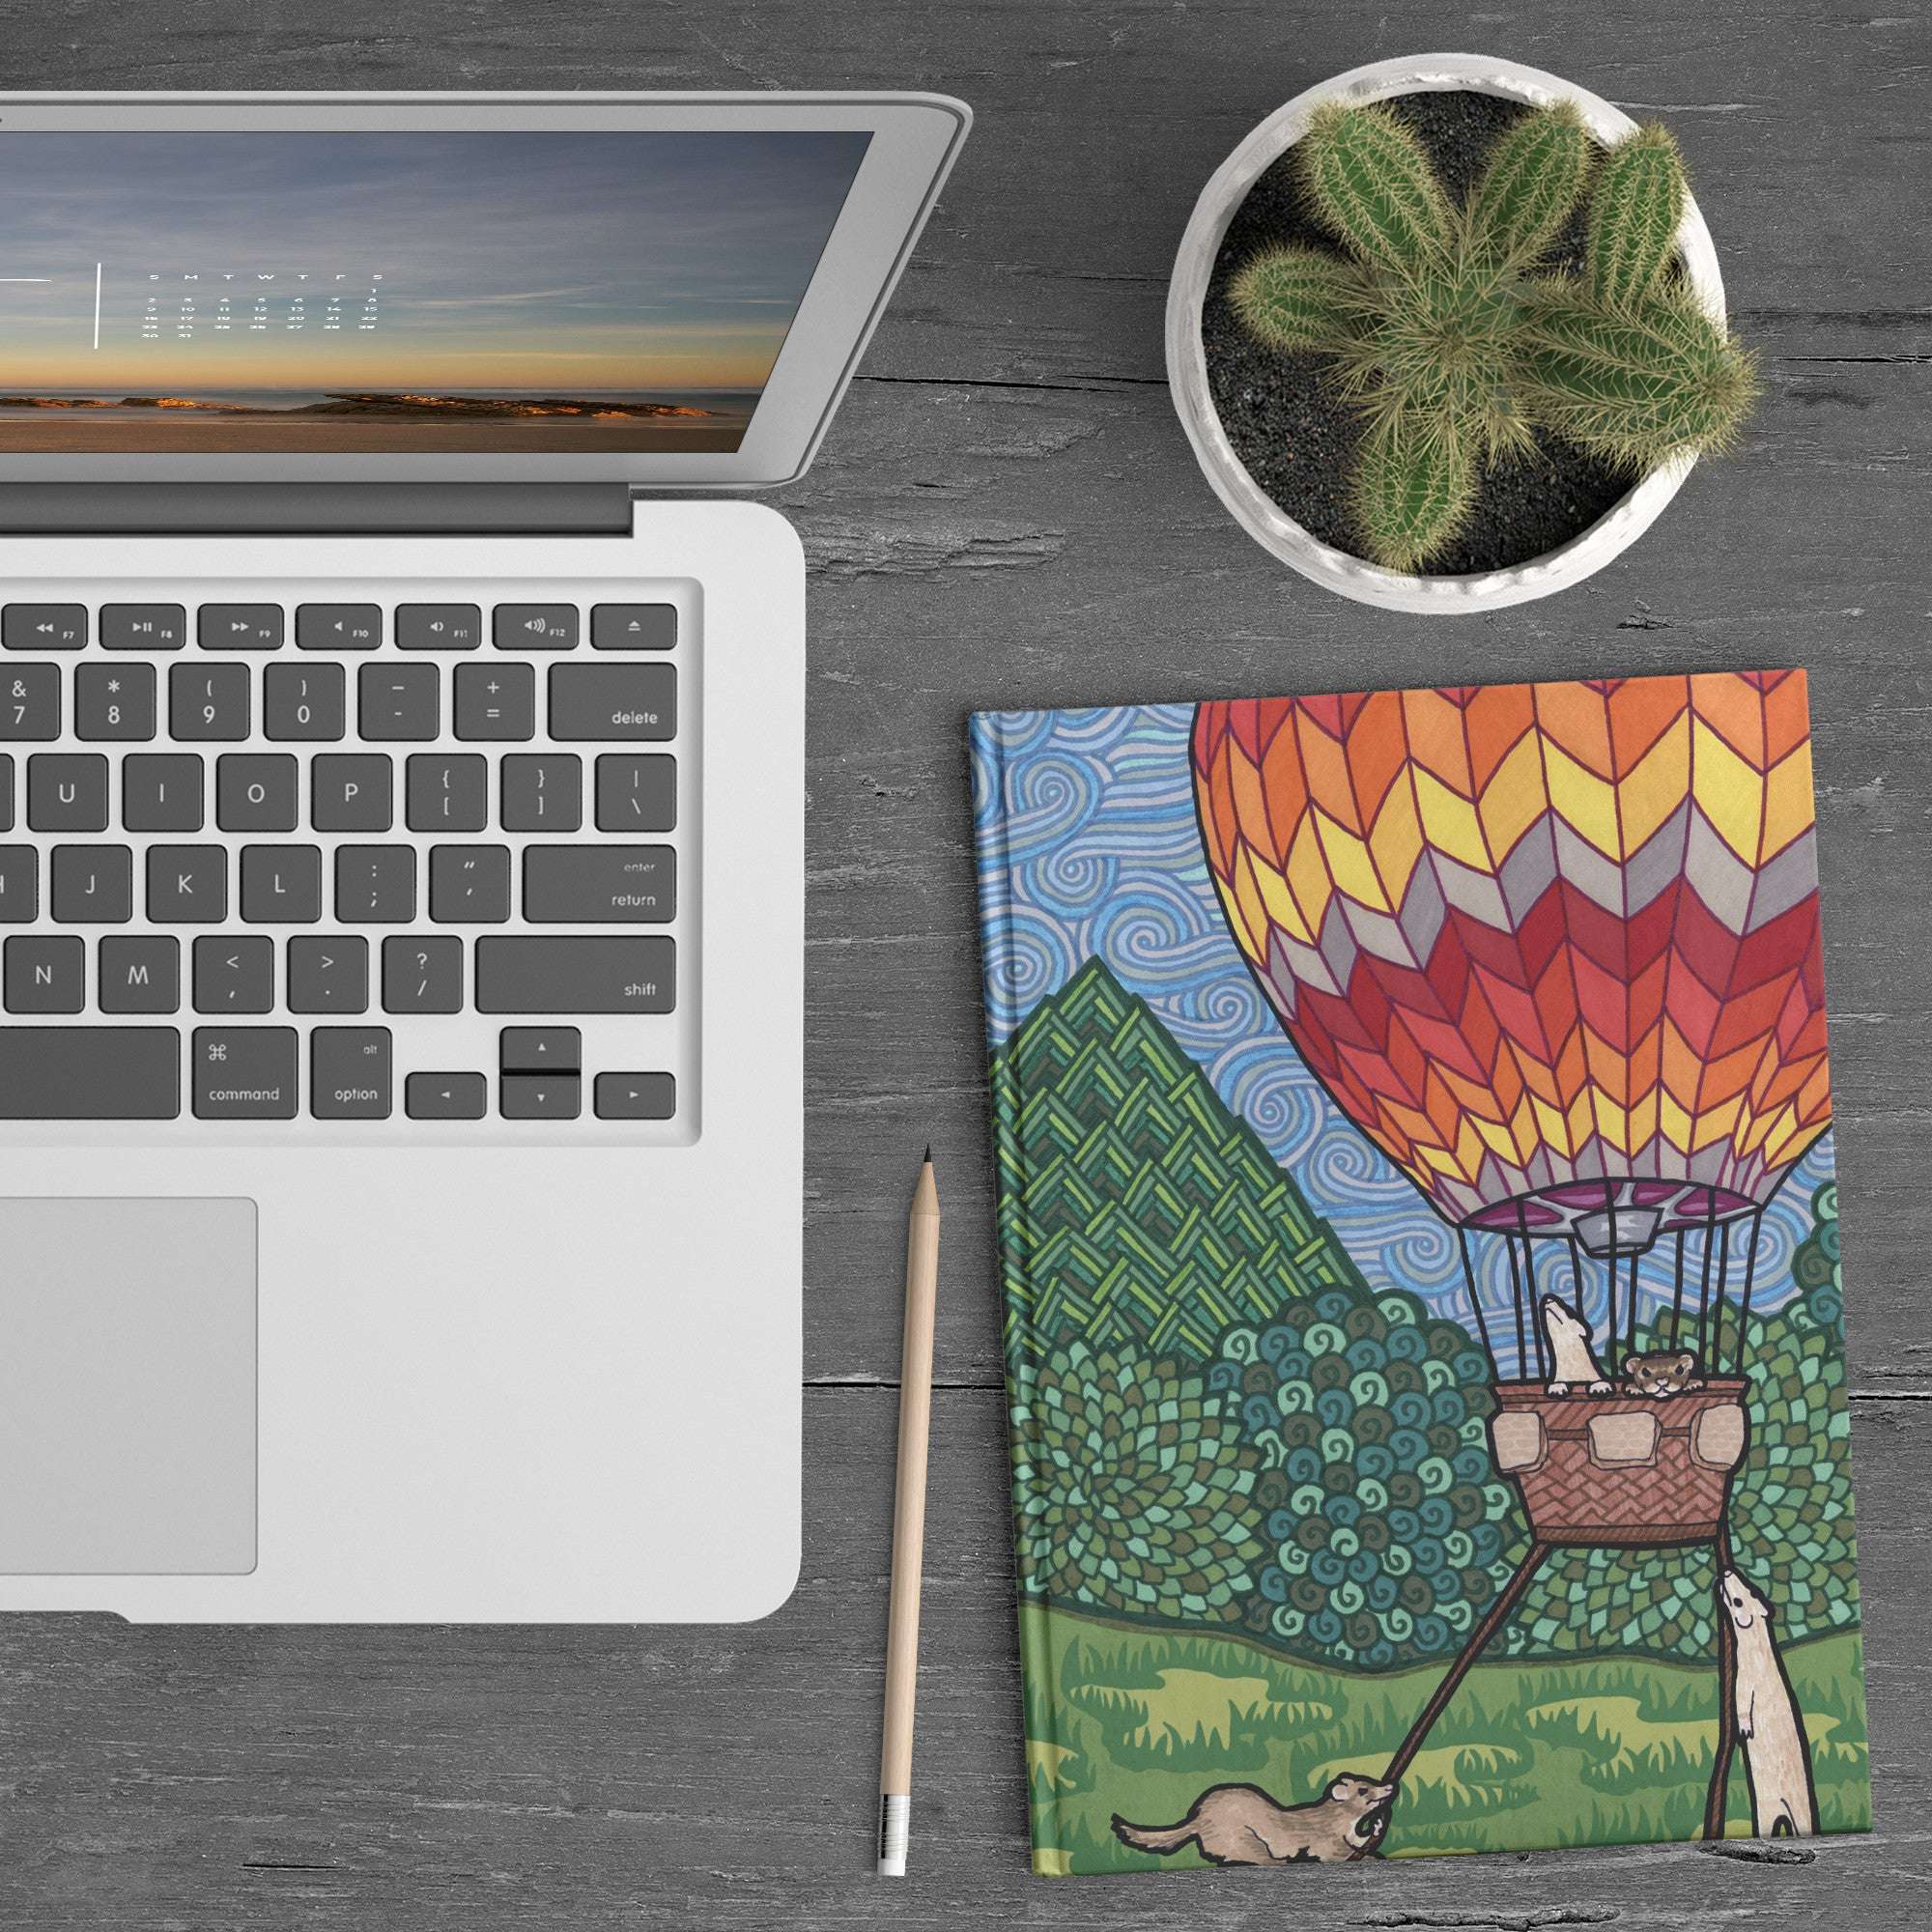 A laptop, closed Ferret Flight Journal with a hot air balloon ferret design, pencil, and a potted cactus on a wooden table.